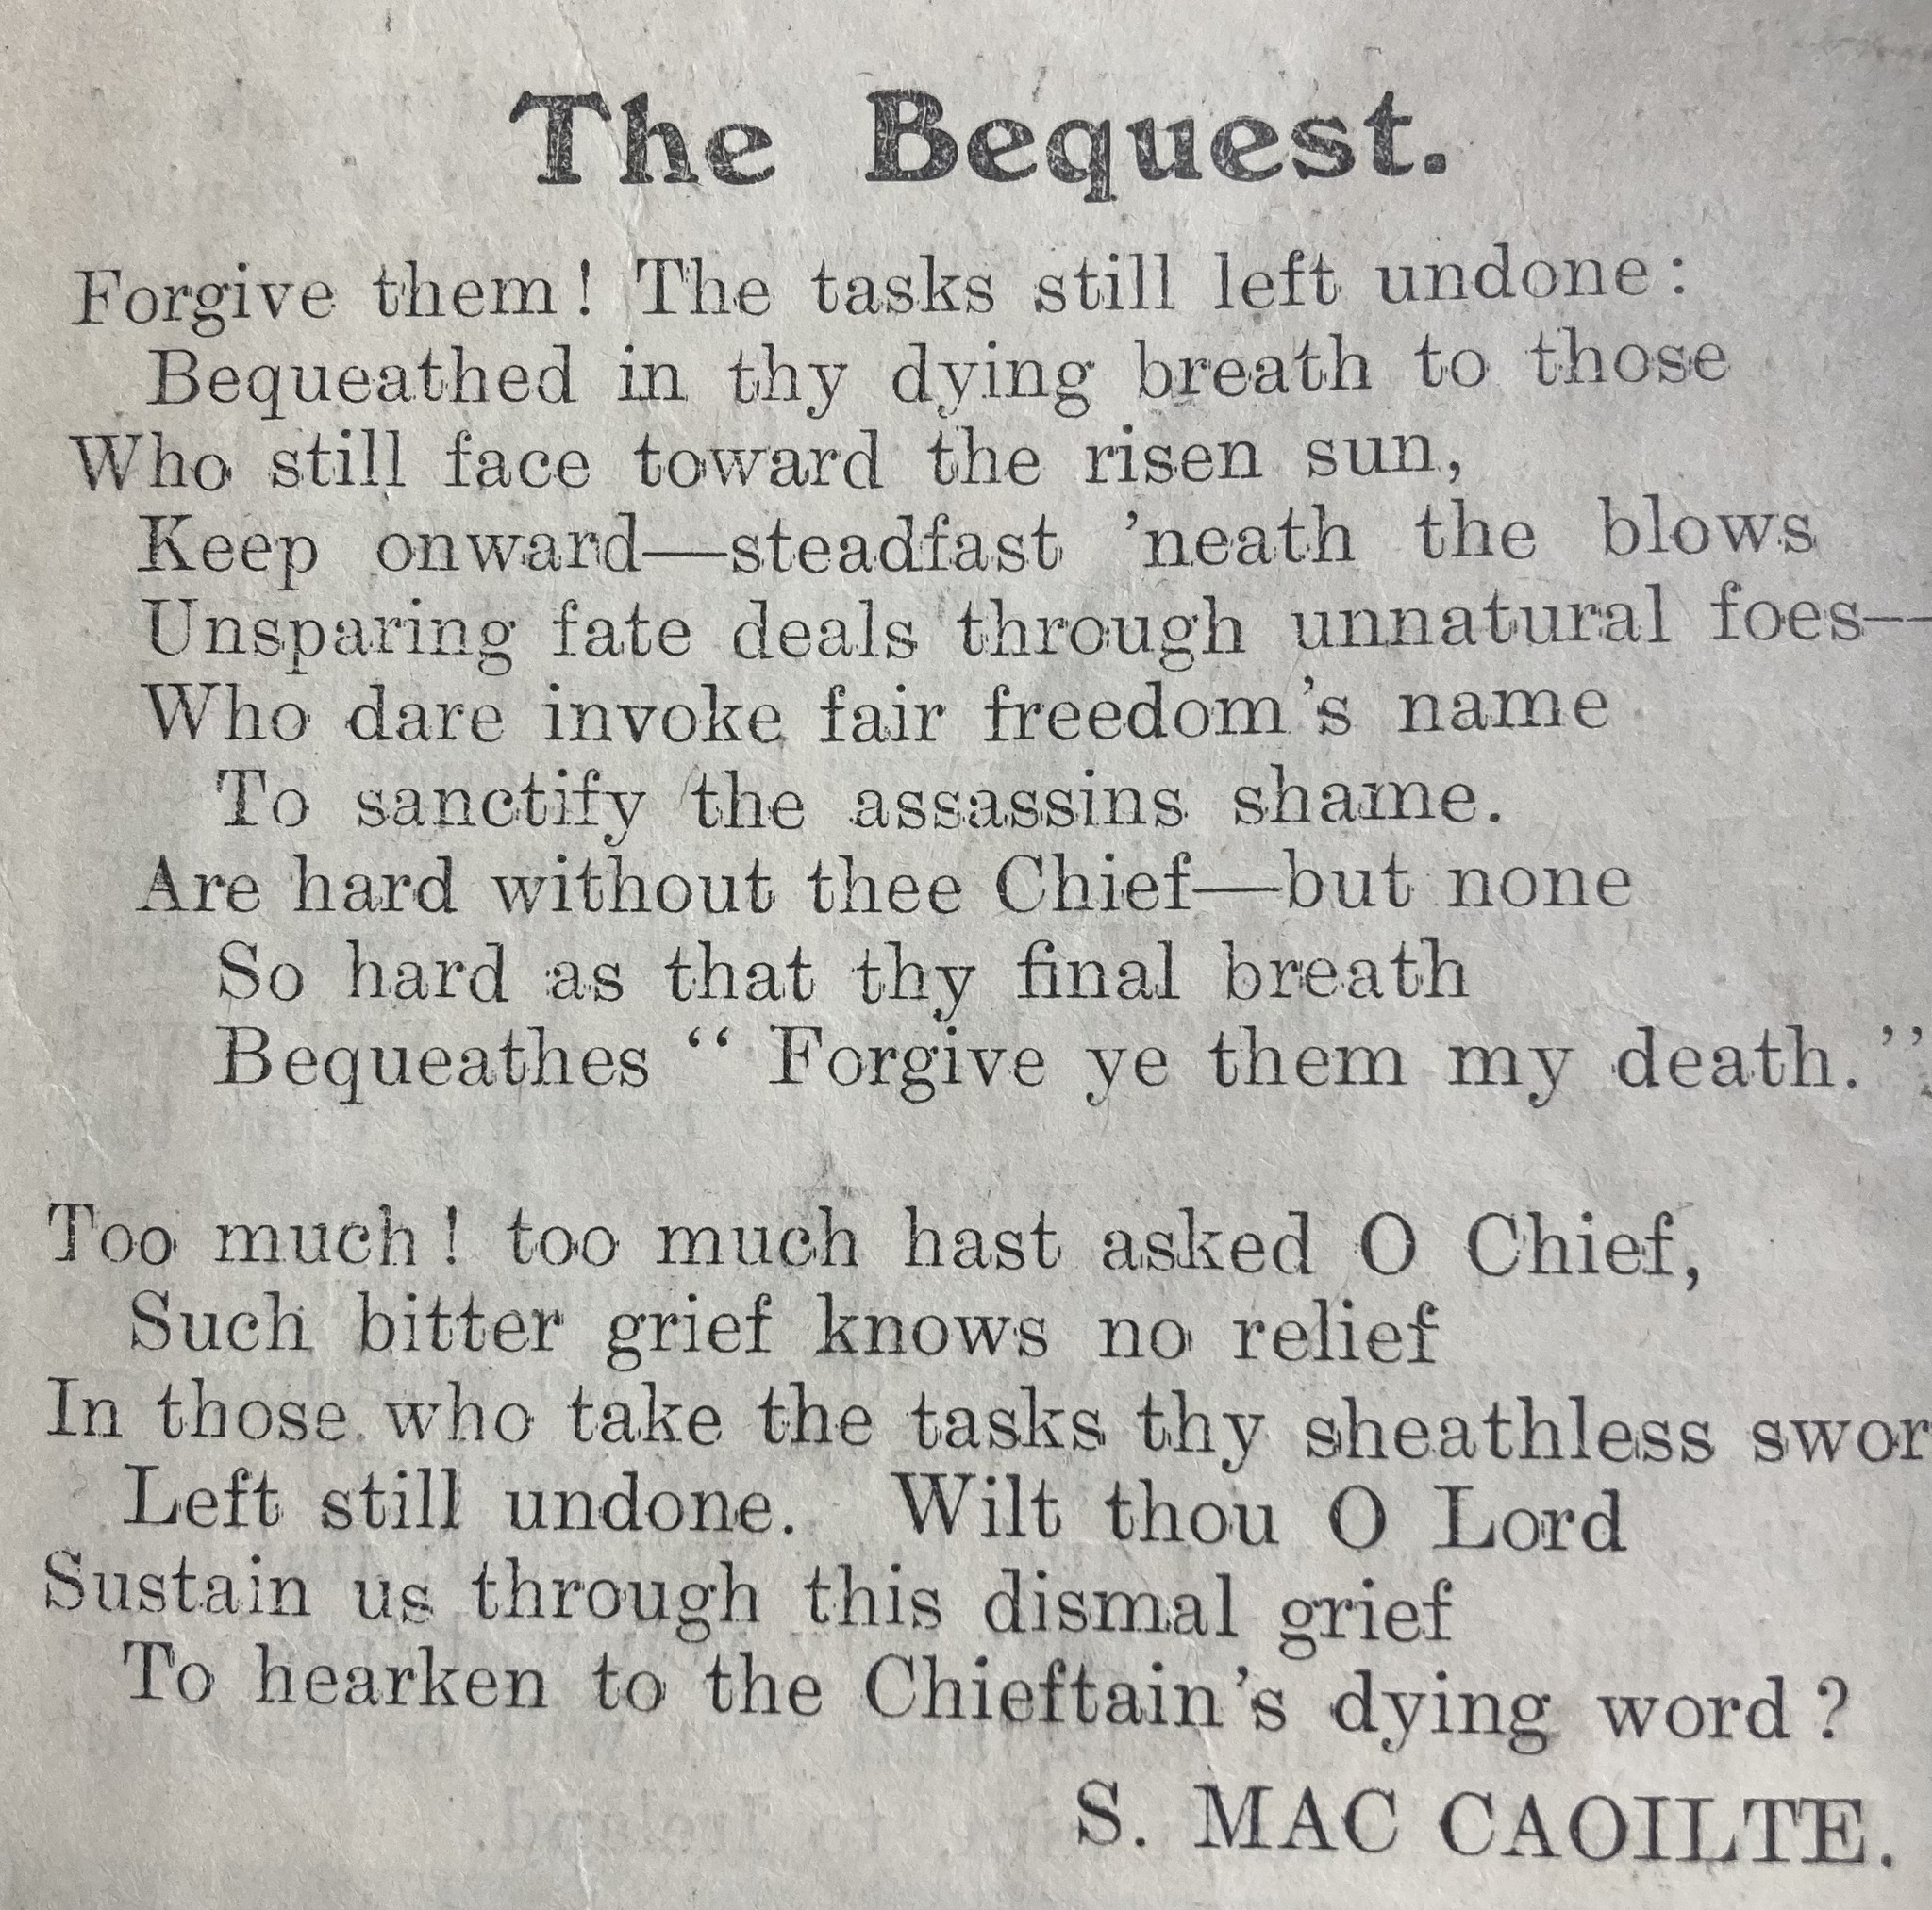 The Bequest, a poem by Sean MacCaoilte